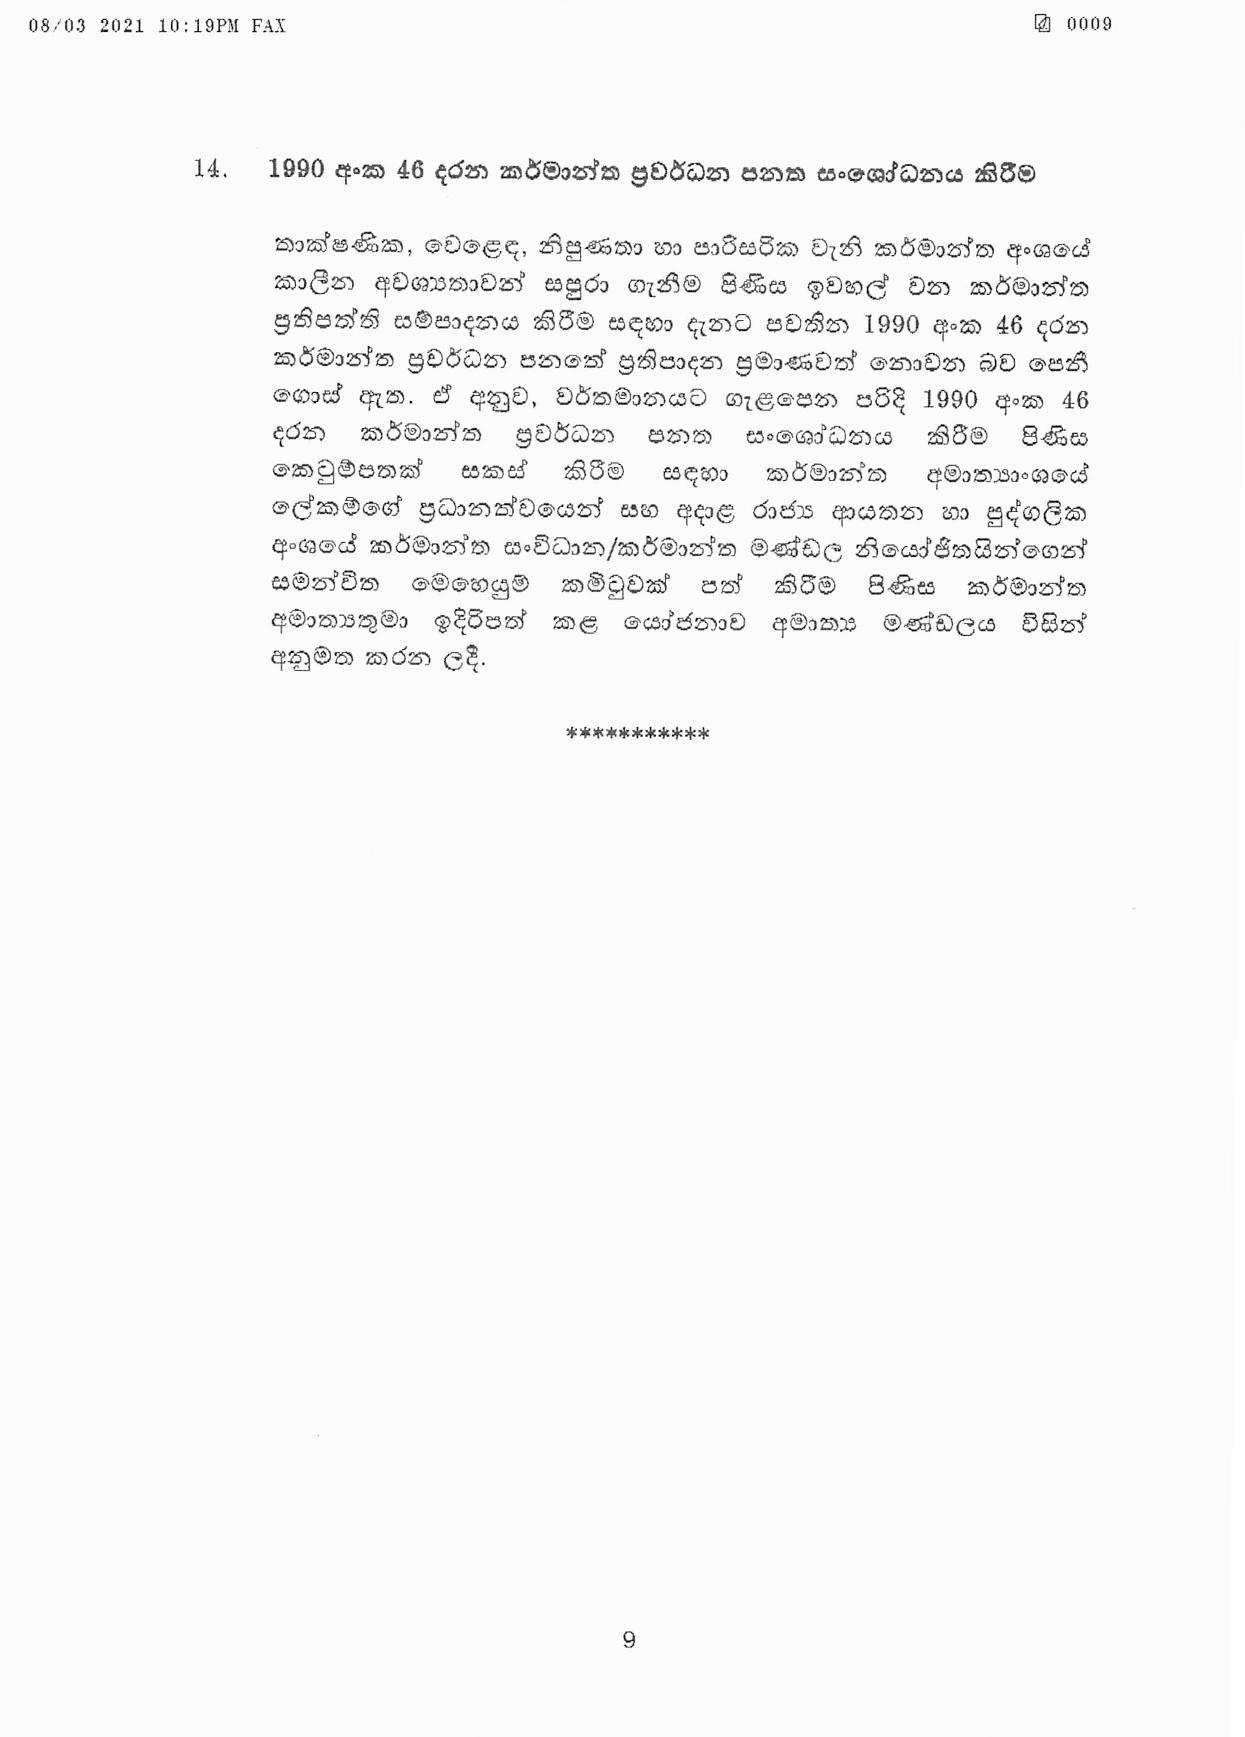 Cabinet Decision on 08.03.2021 page 009